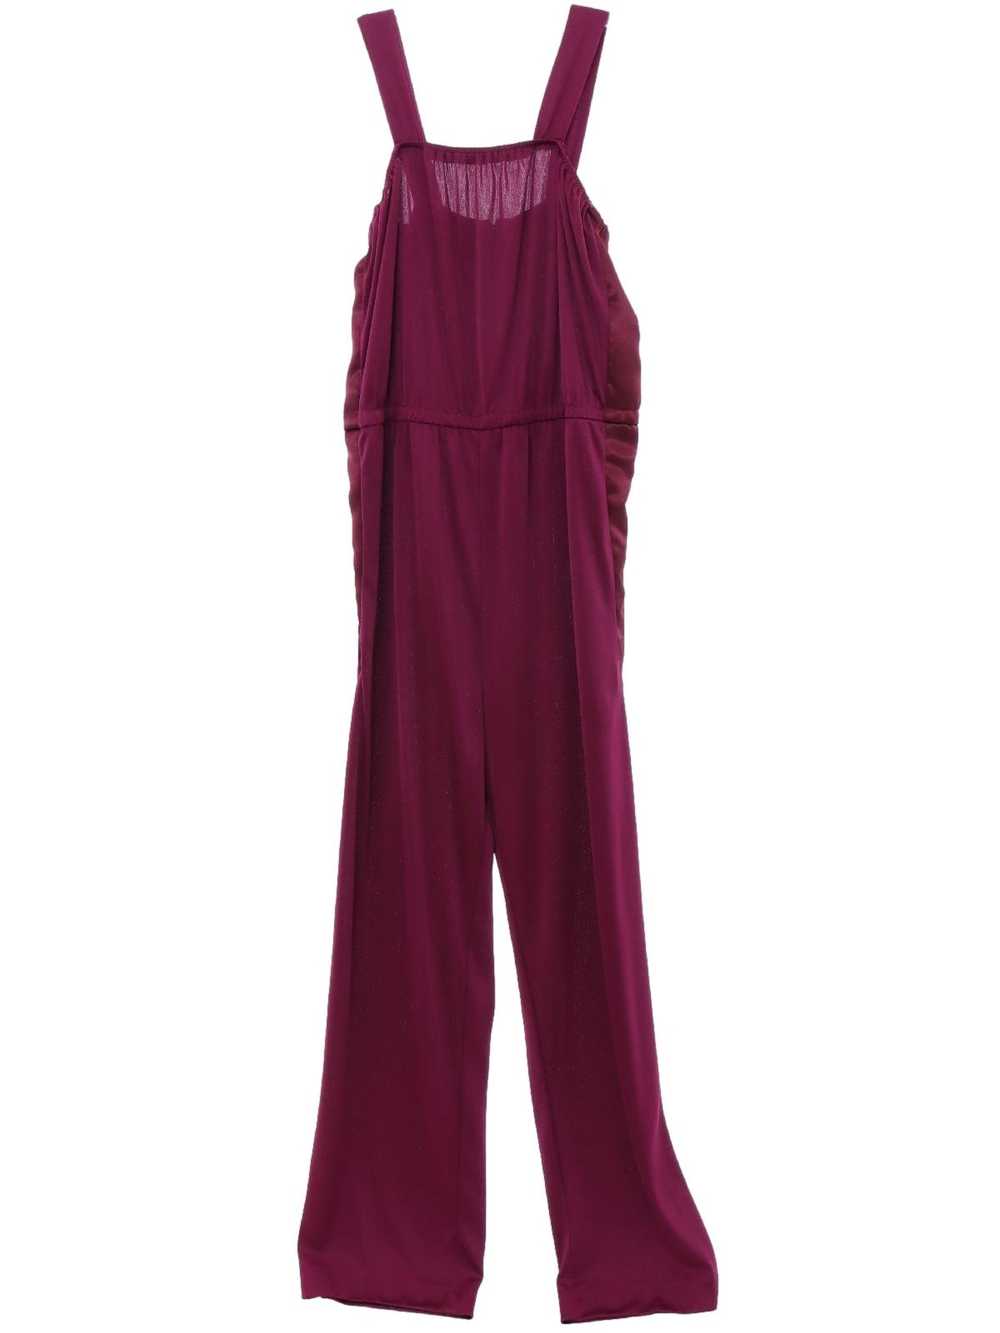 1980's Jodi Womens Totally 80s Jumpsuit - image 1